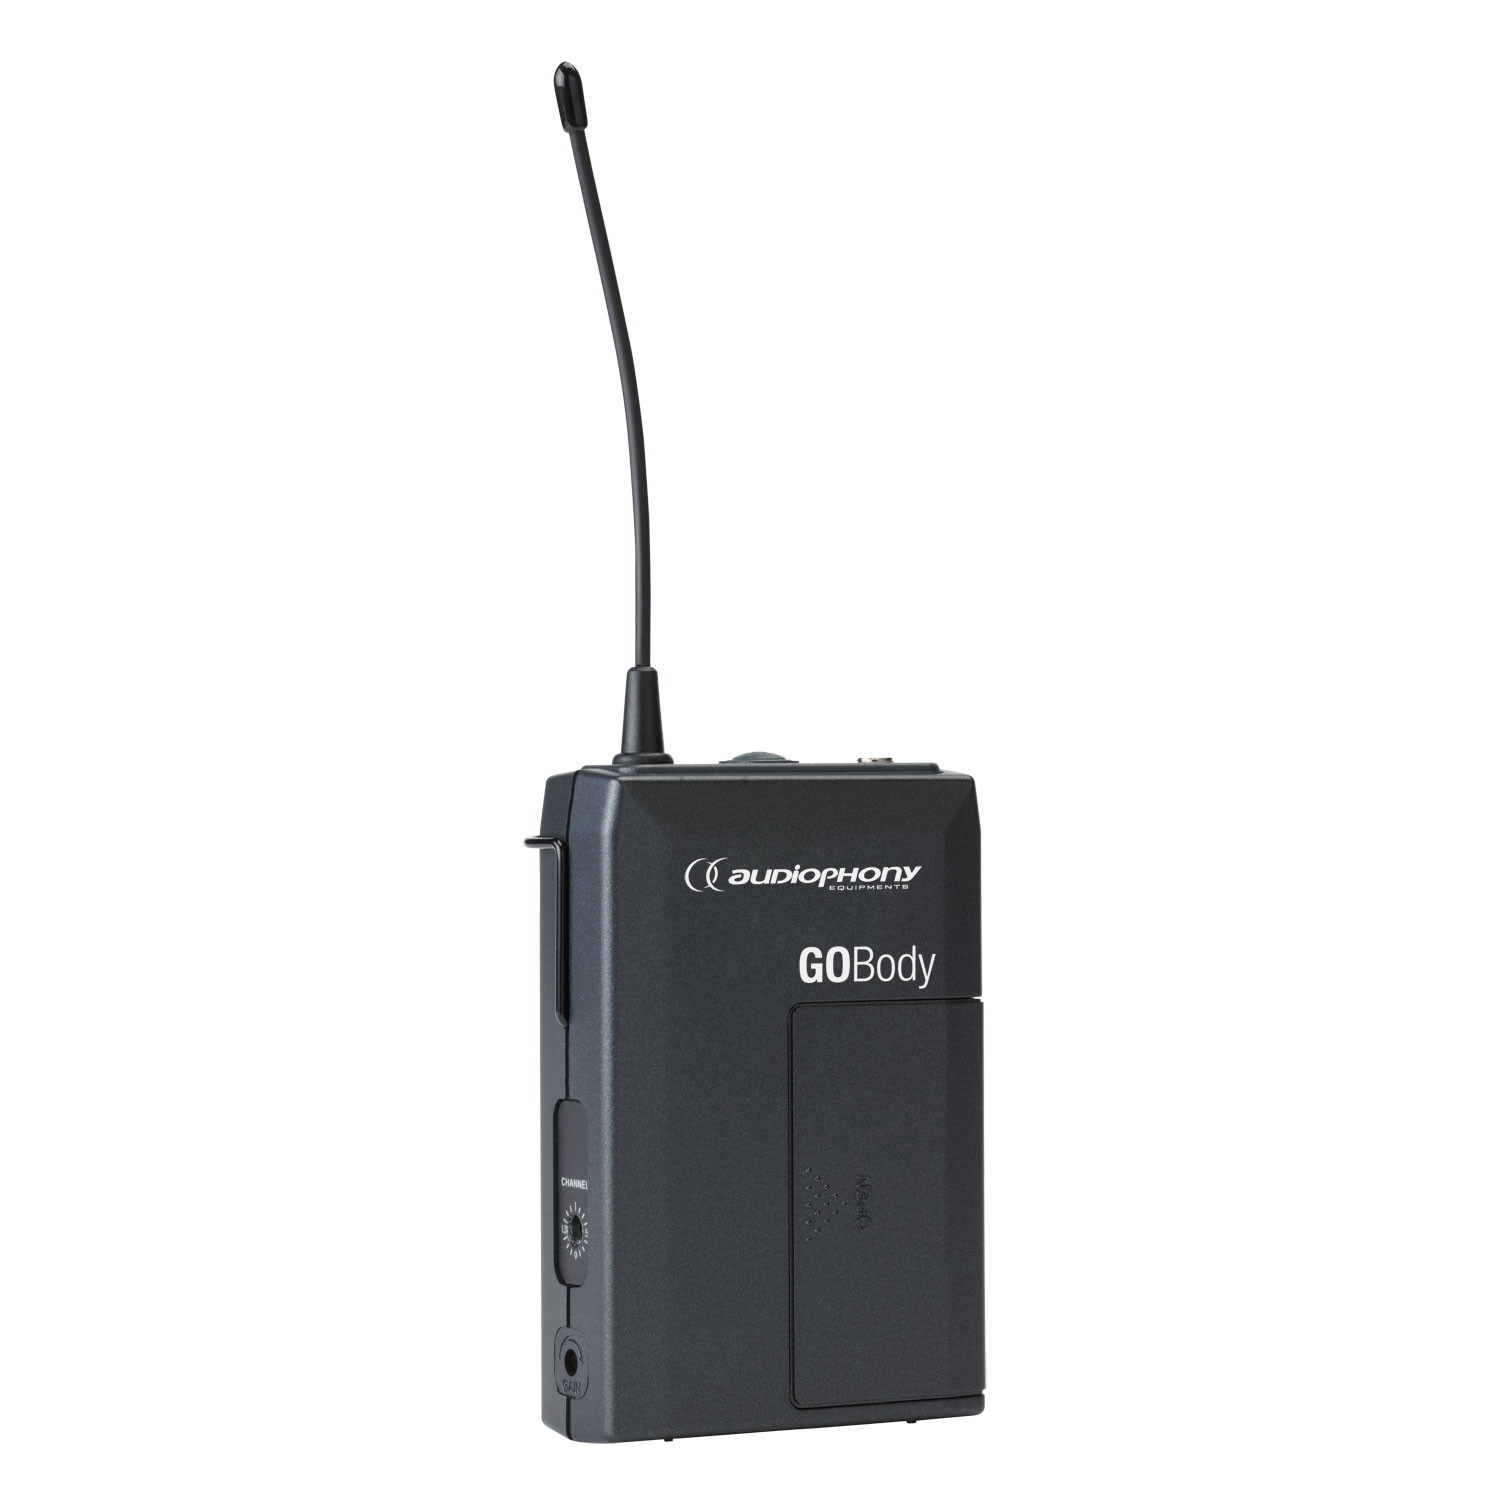 UHF transmitter with 16 frequencies without microphone - 500MHz range